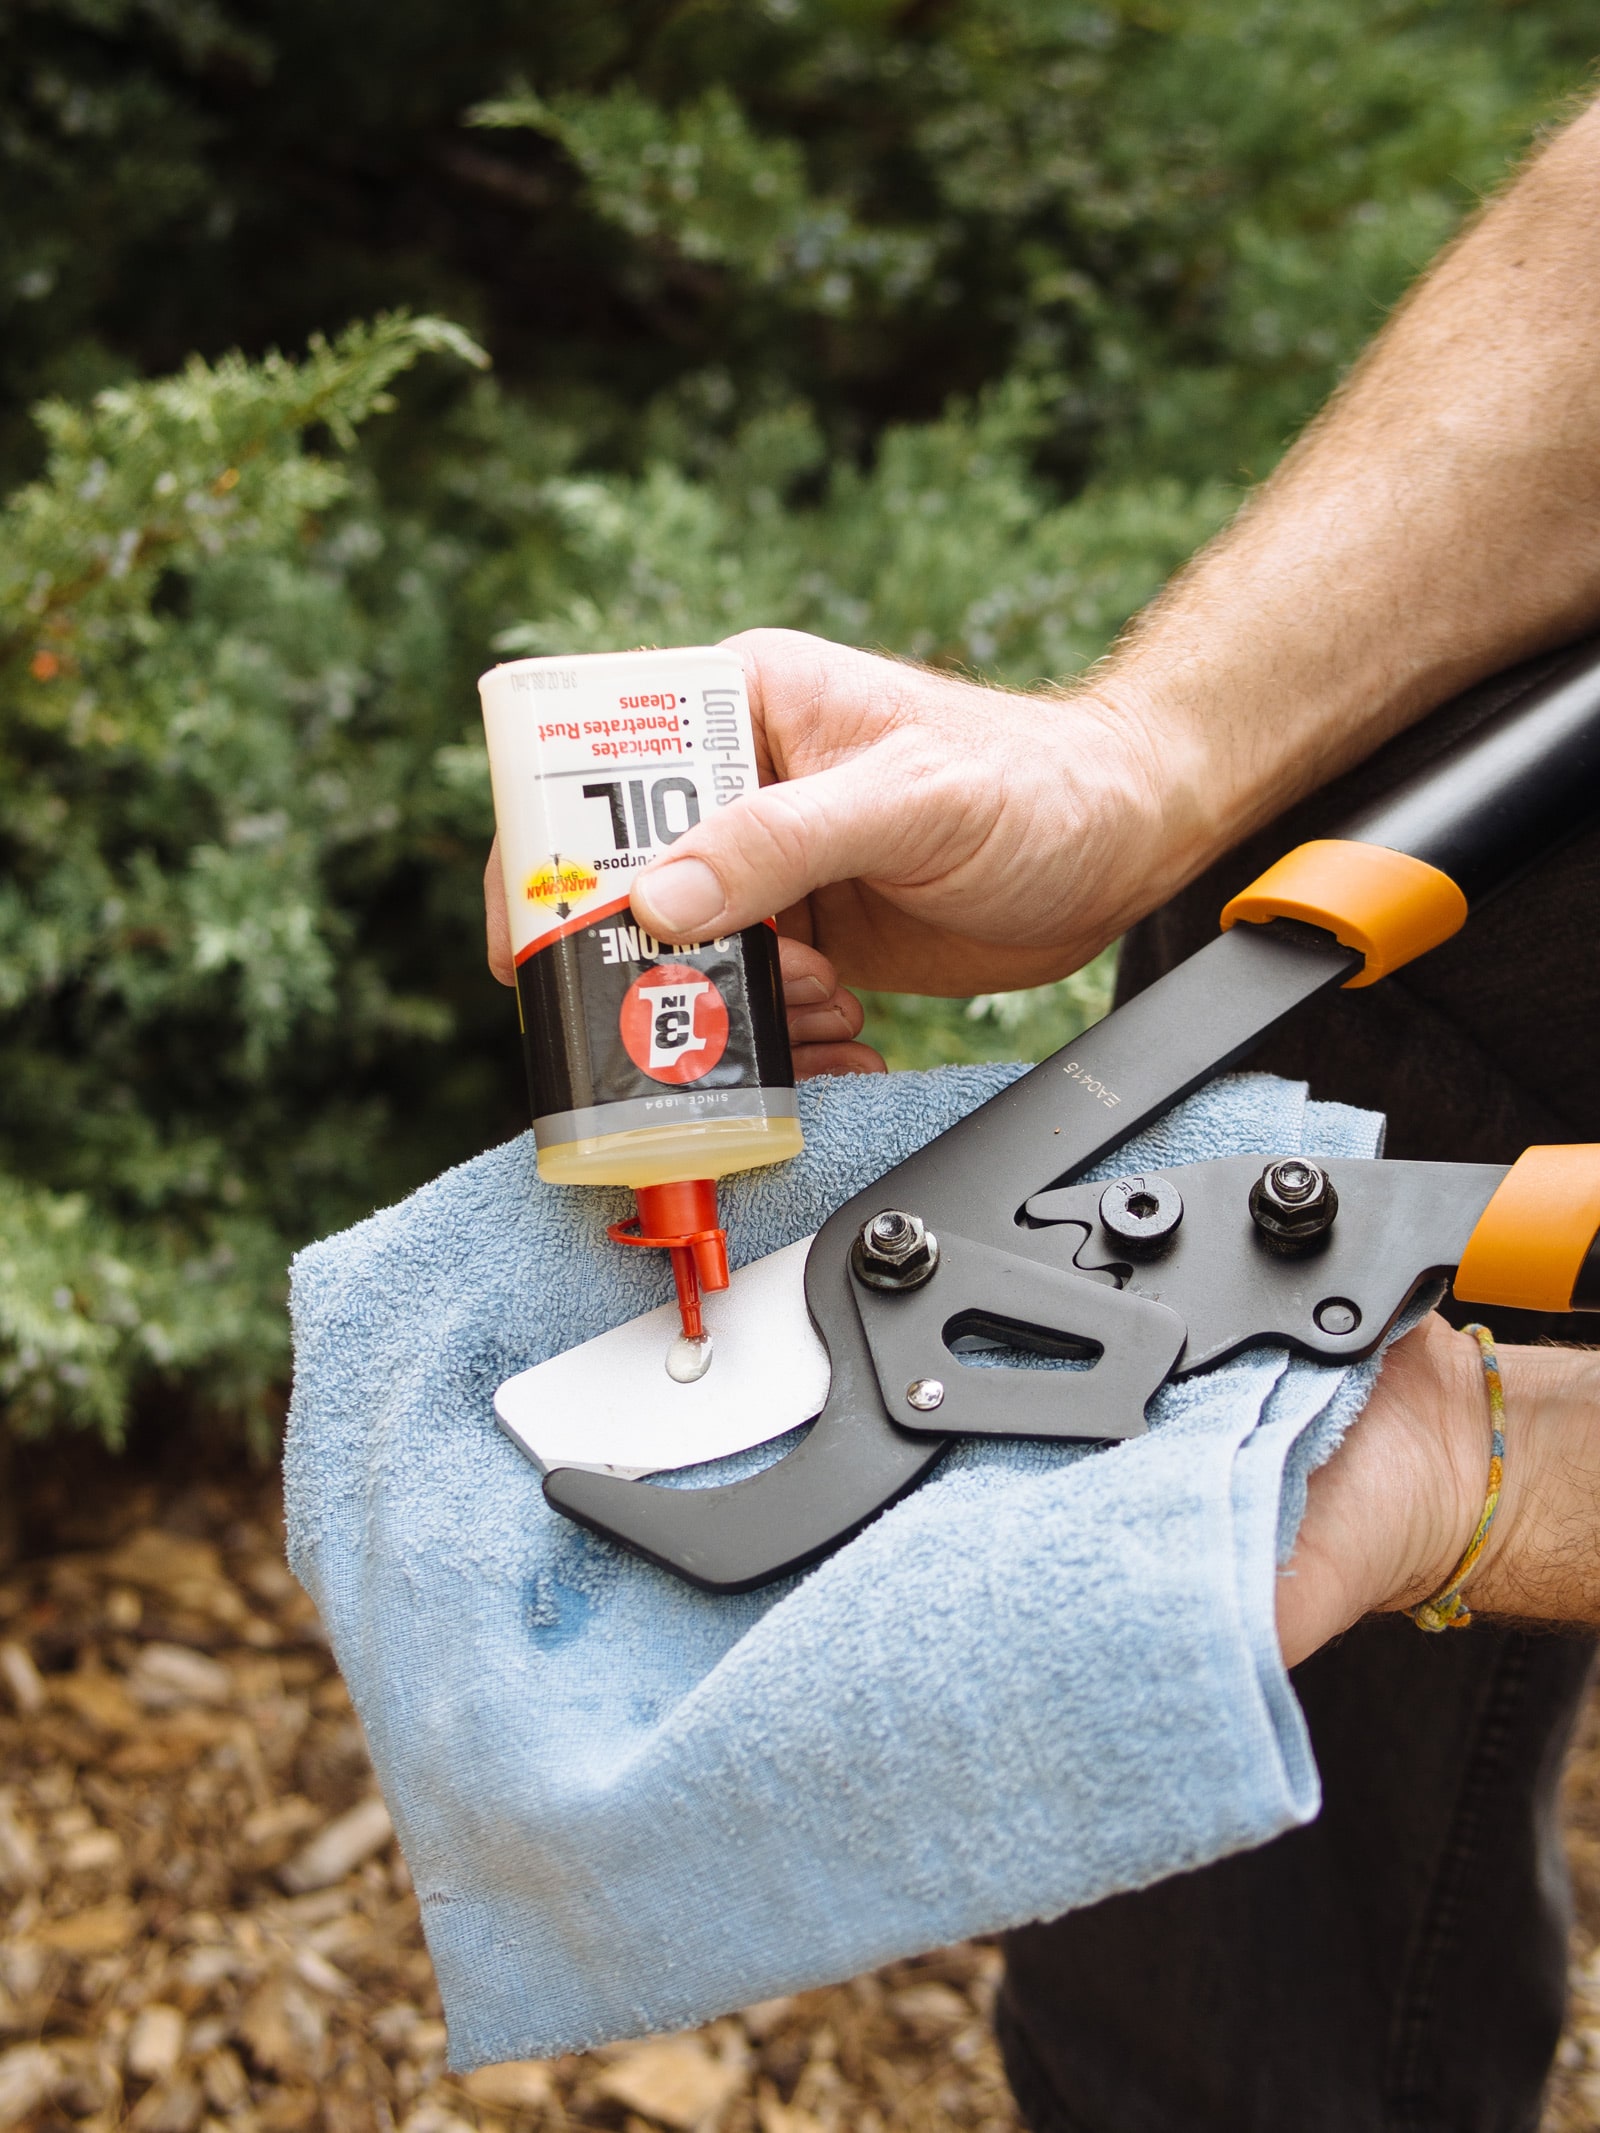 Clean, store, and oil gardening tools with 3-IN-ONE Multi-Purpose Oil